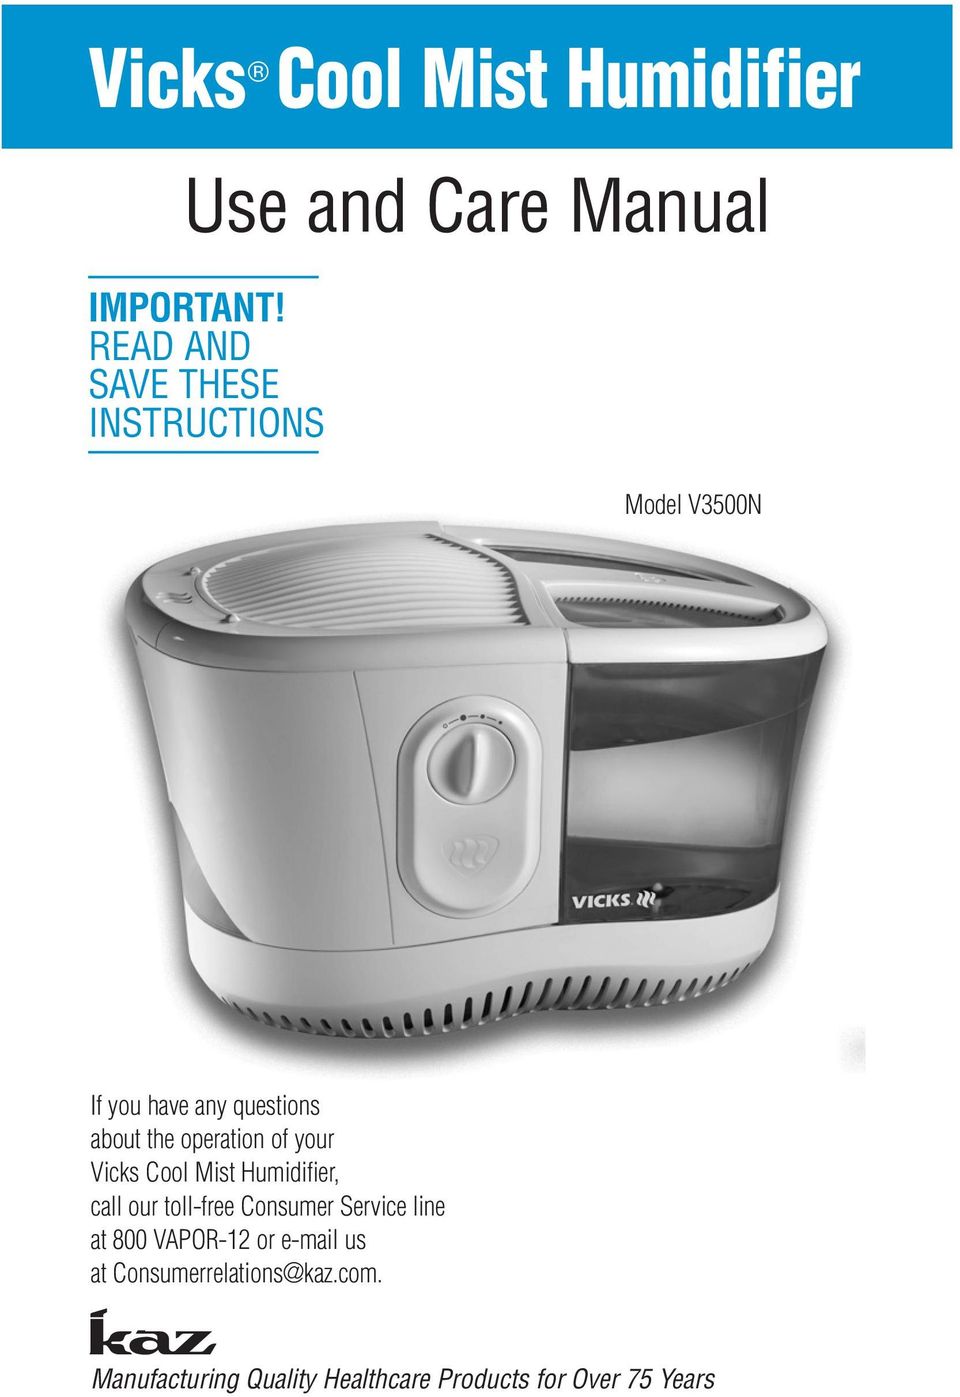 operation of your Vicks Cool Mist Humidifier, call our toll-free Consumer Service line